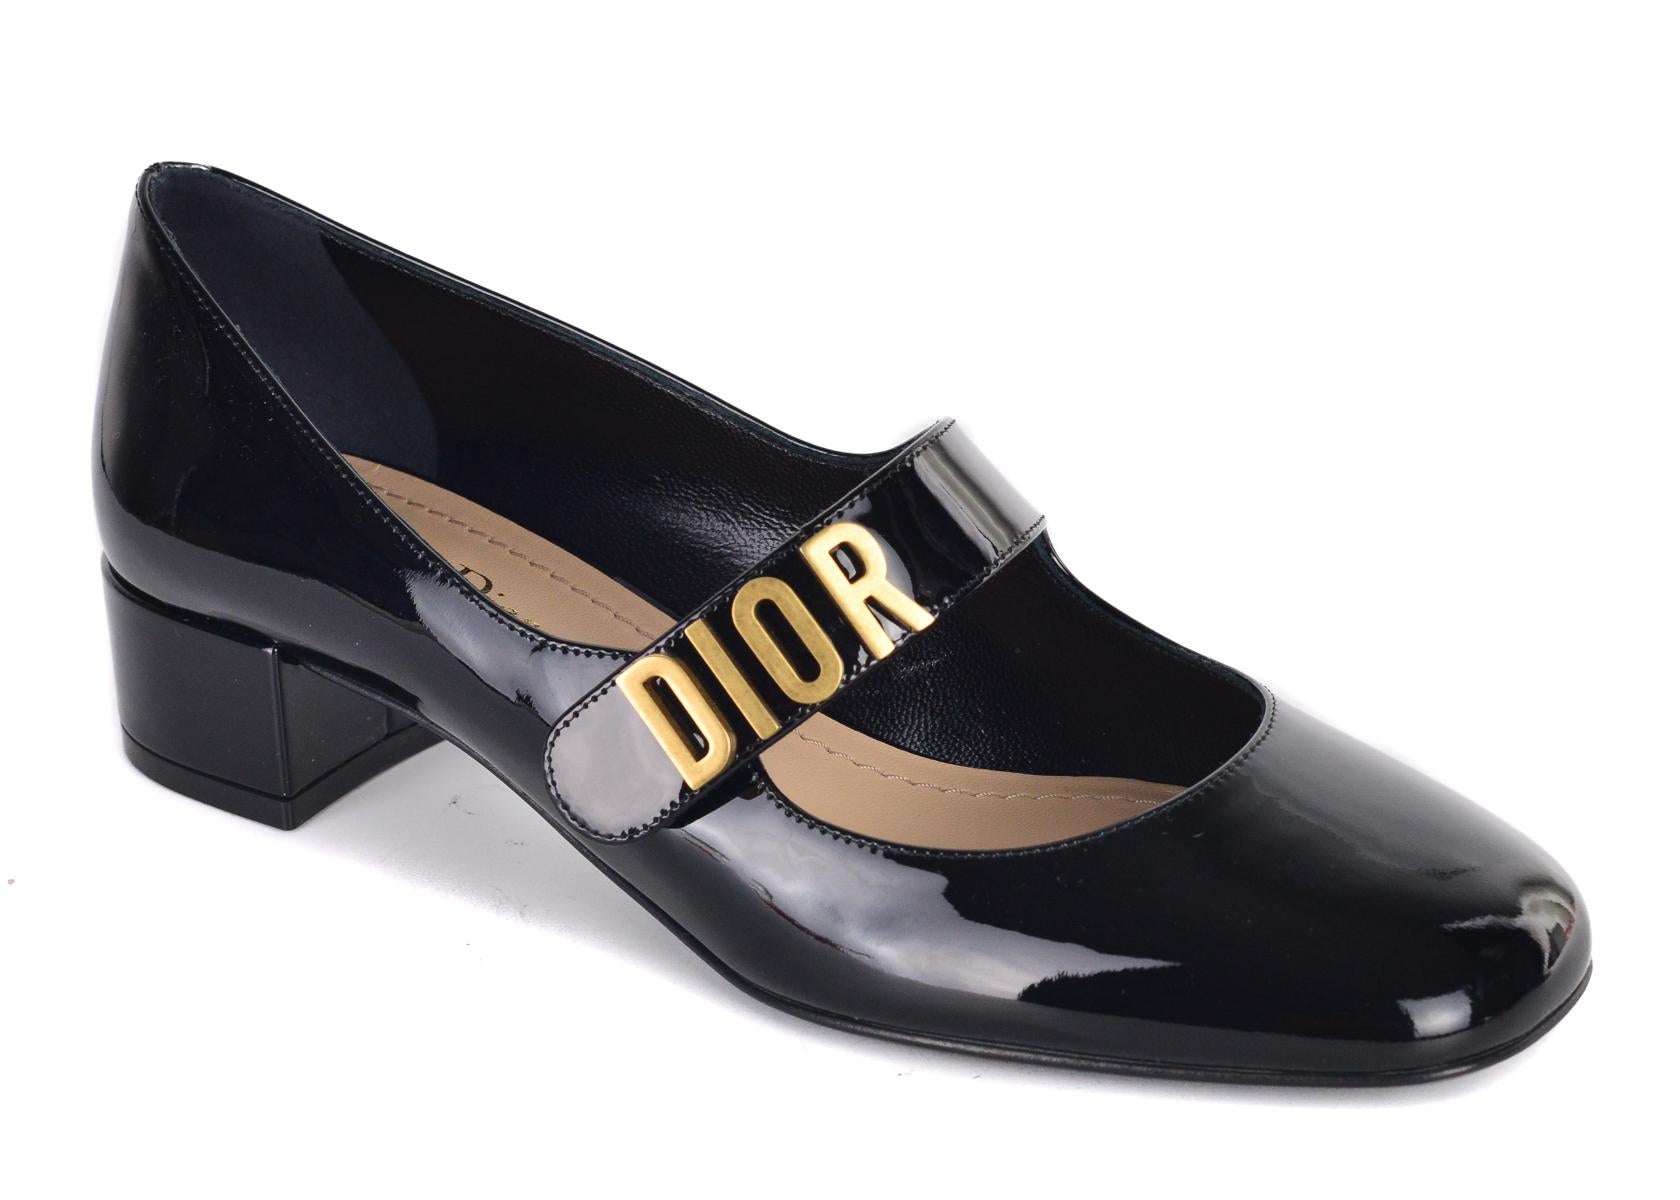 Christian Dior's Baby-D pumps. These pumps feature a Dior gold tone hardware logo for an emphasize in style. Pair with regular blue denims for a chic and sophisticated everyday look.

Christian Dior's Baby-D pumps
Patent Leather
Approx. 2 inch Heel